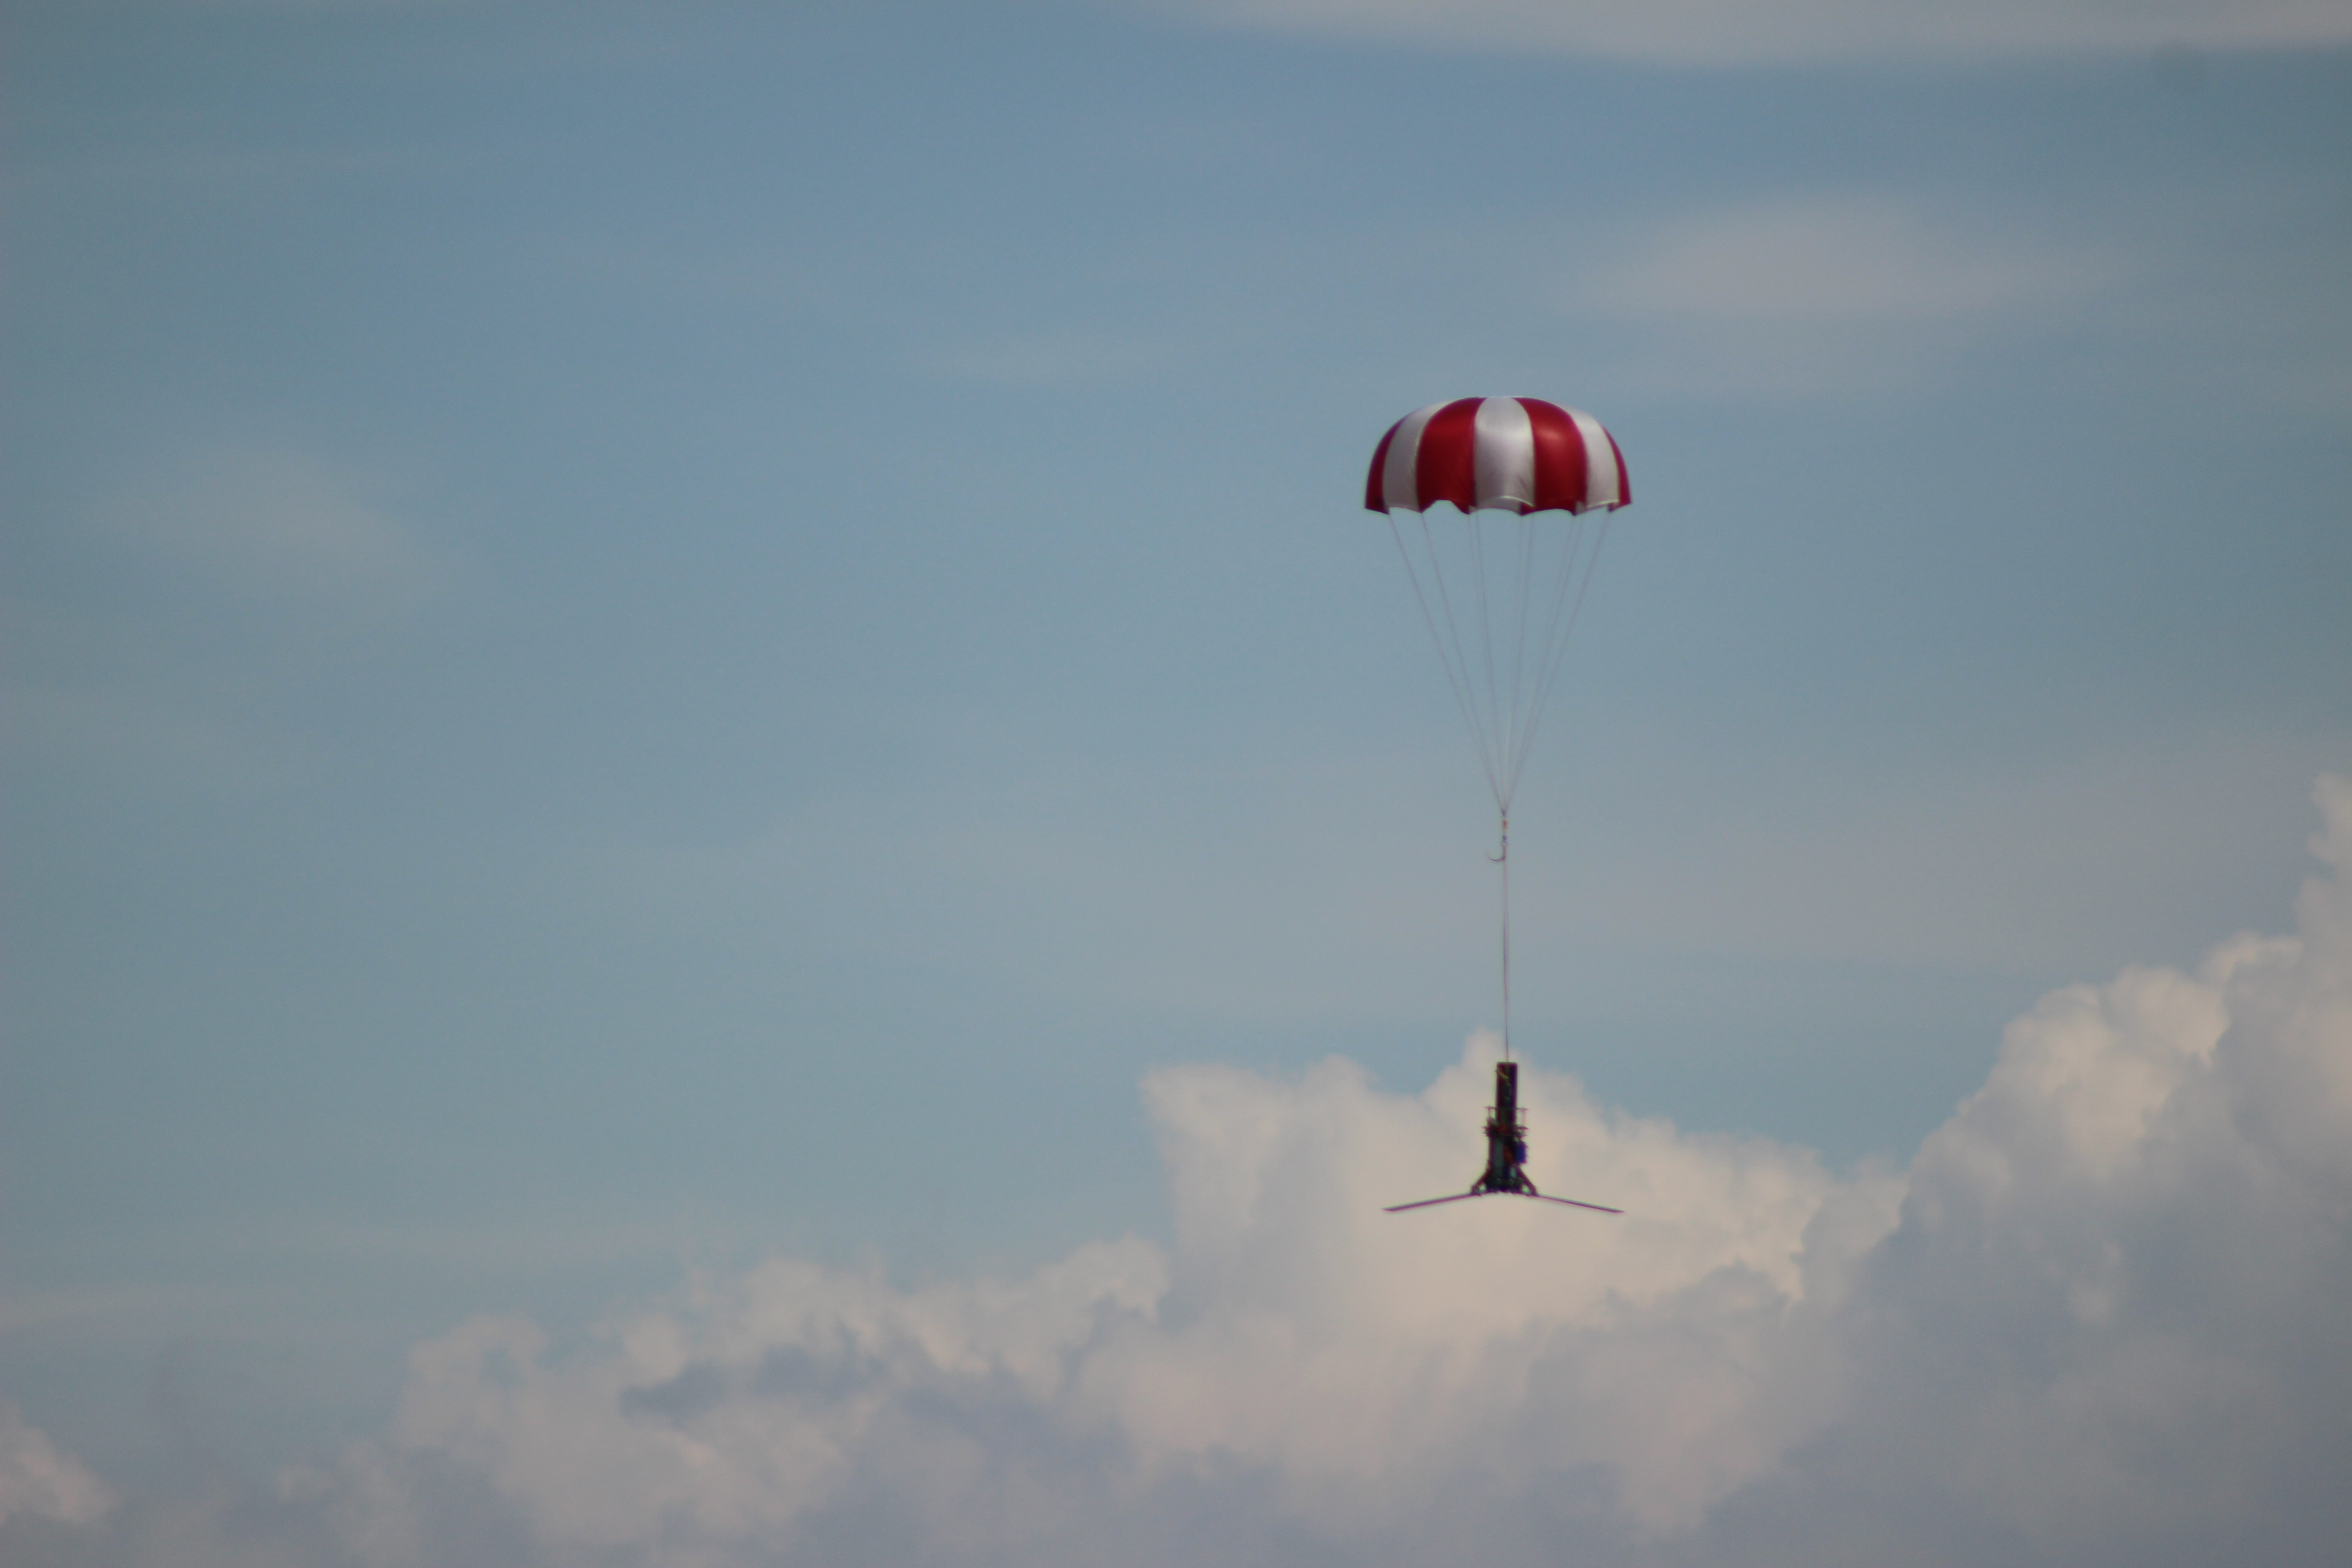 Payload descending to the ground